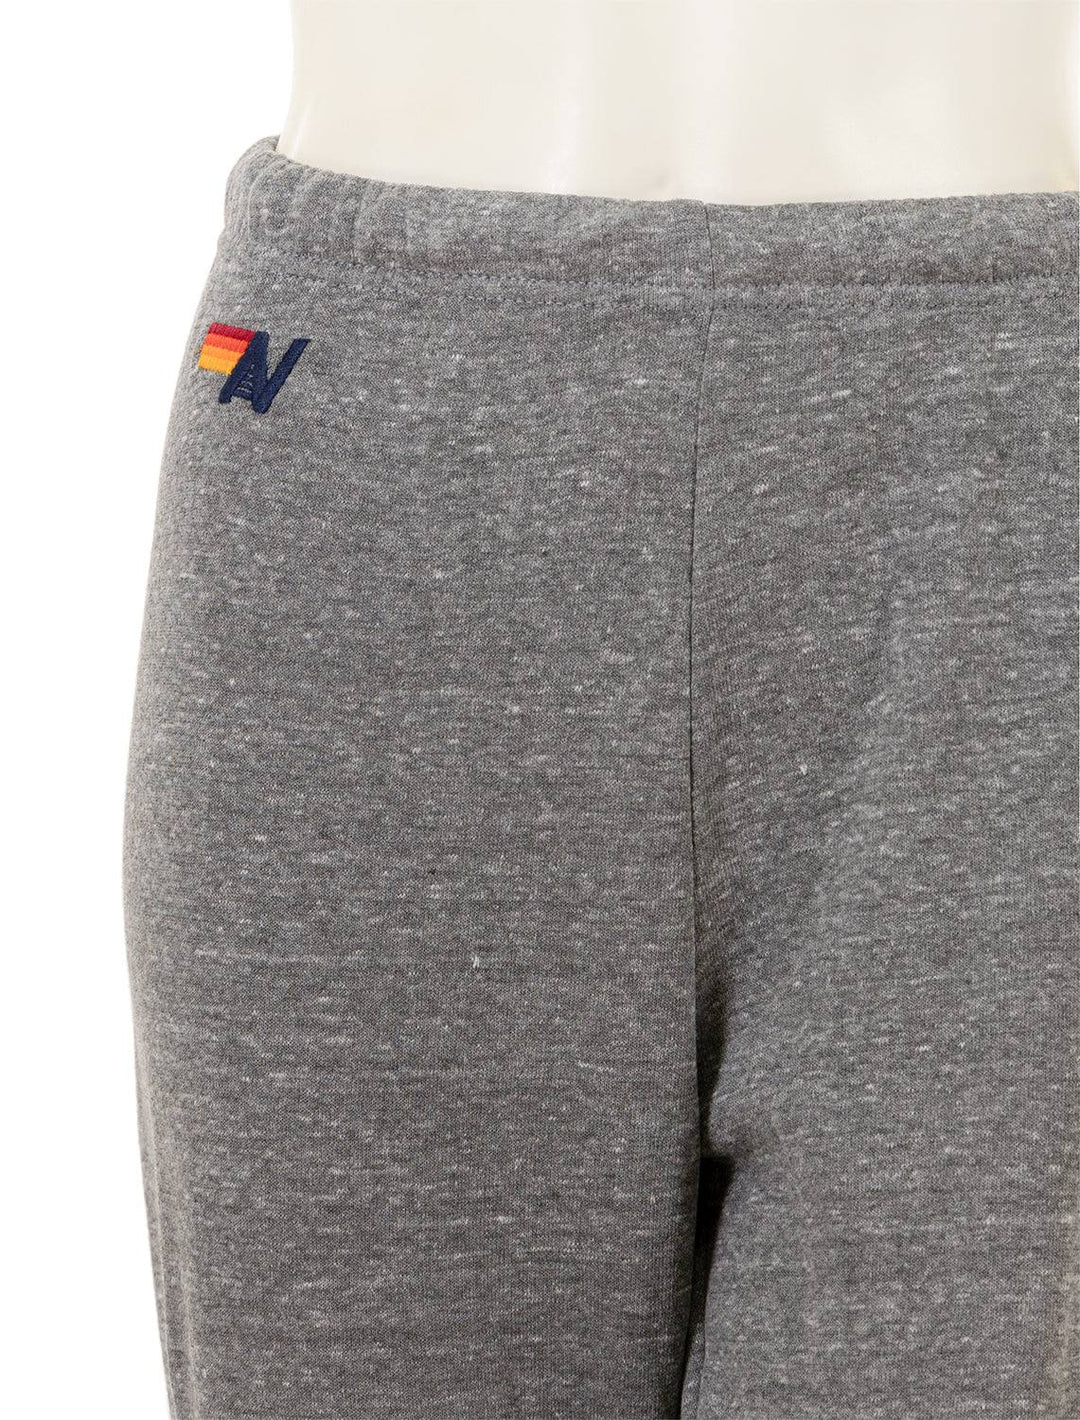 Close-up view of Aviator Nation's 5 stripe womens sweatpants in heather grey.